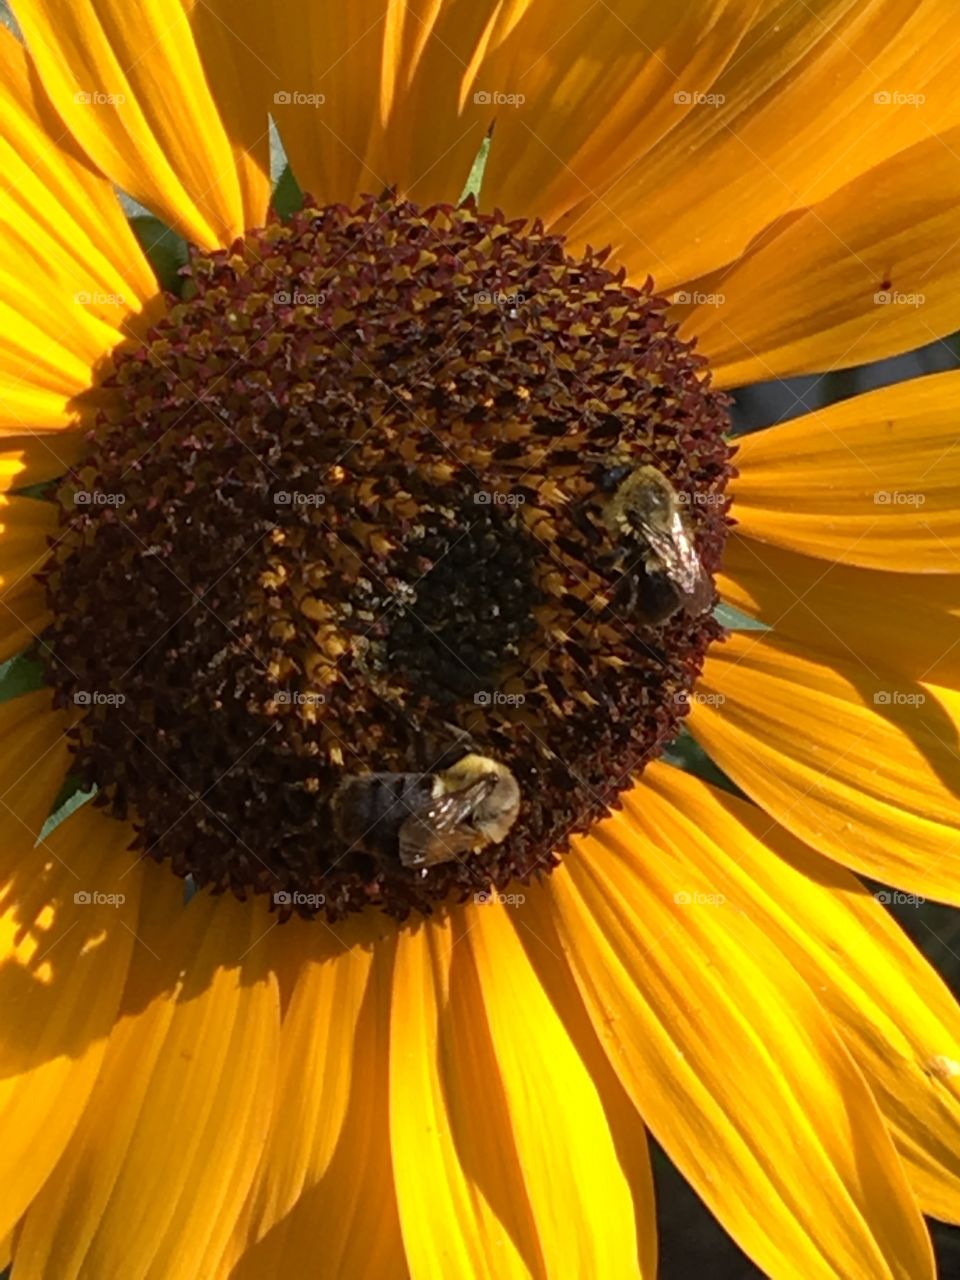 Late summer bees